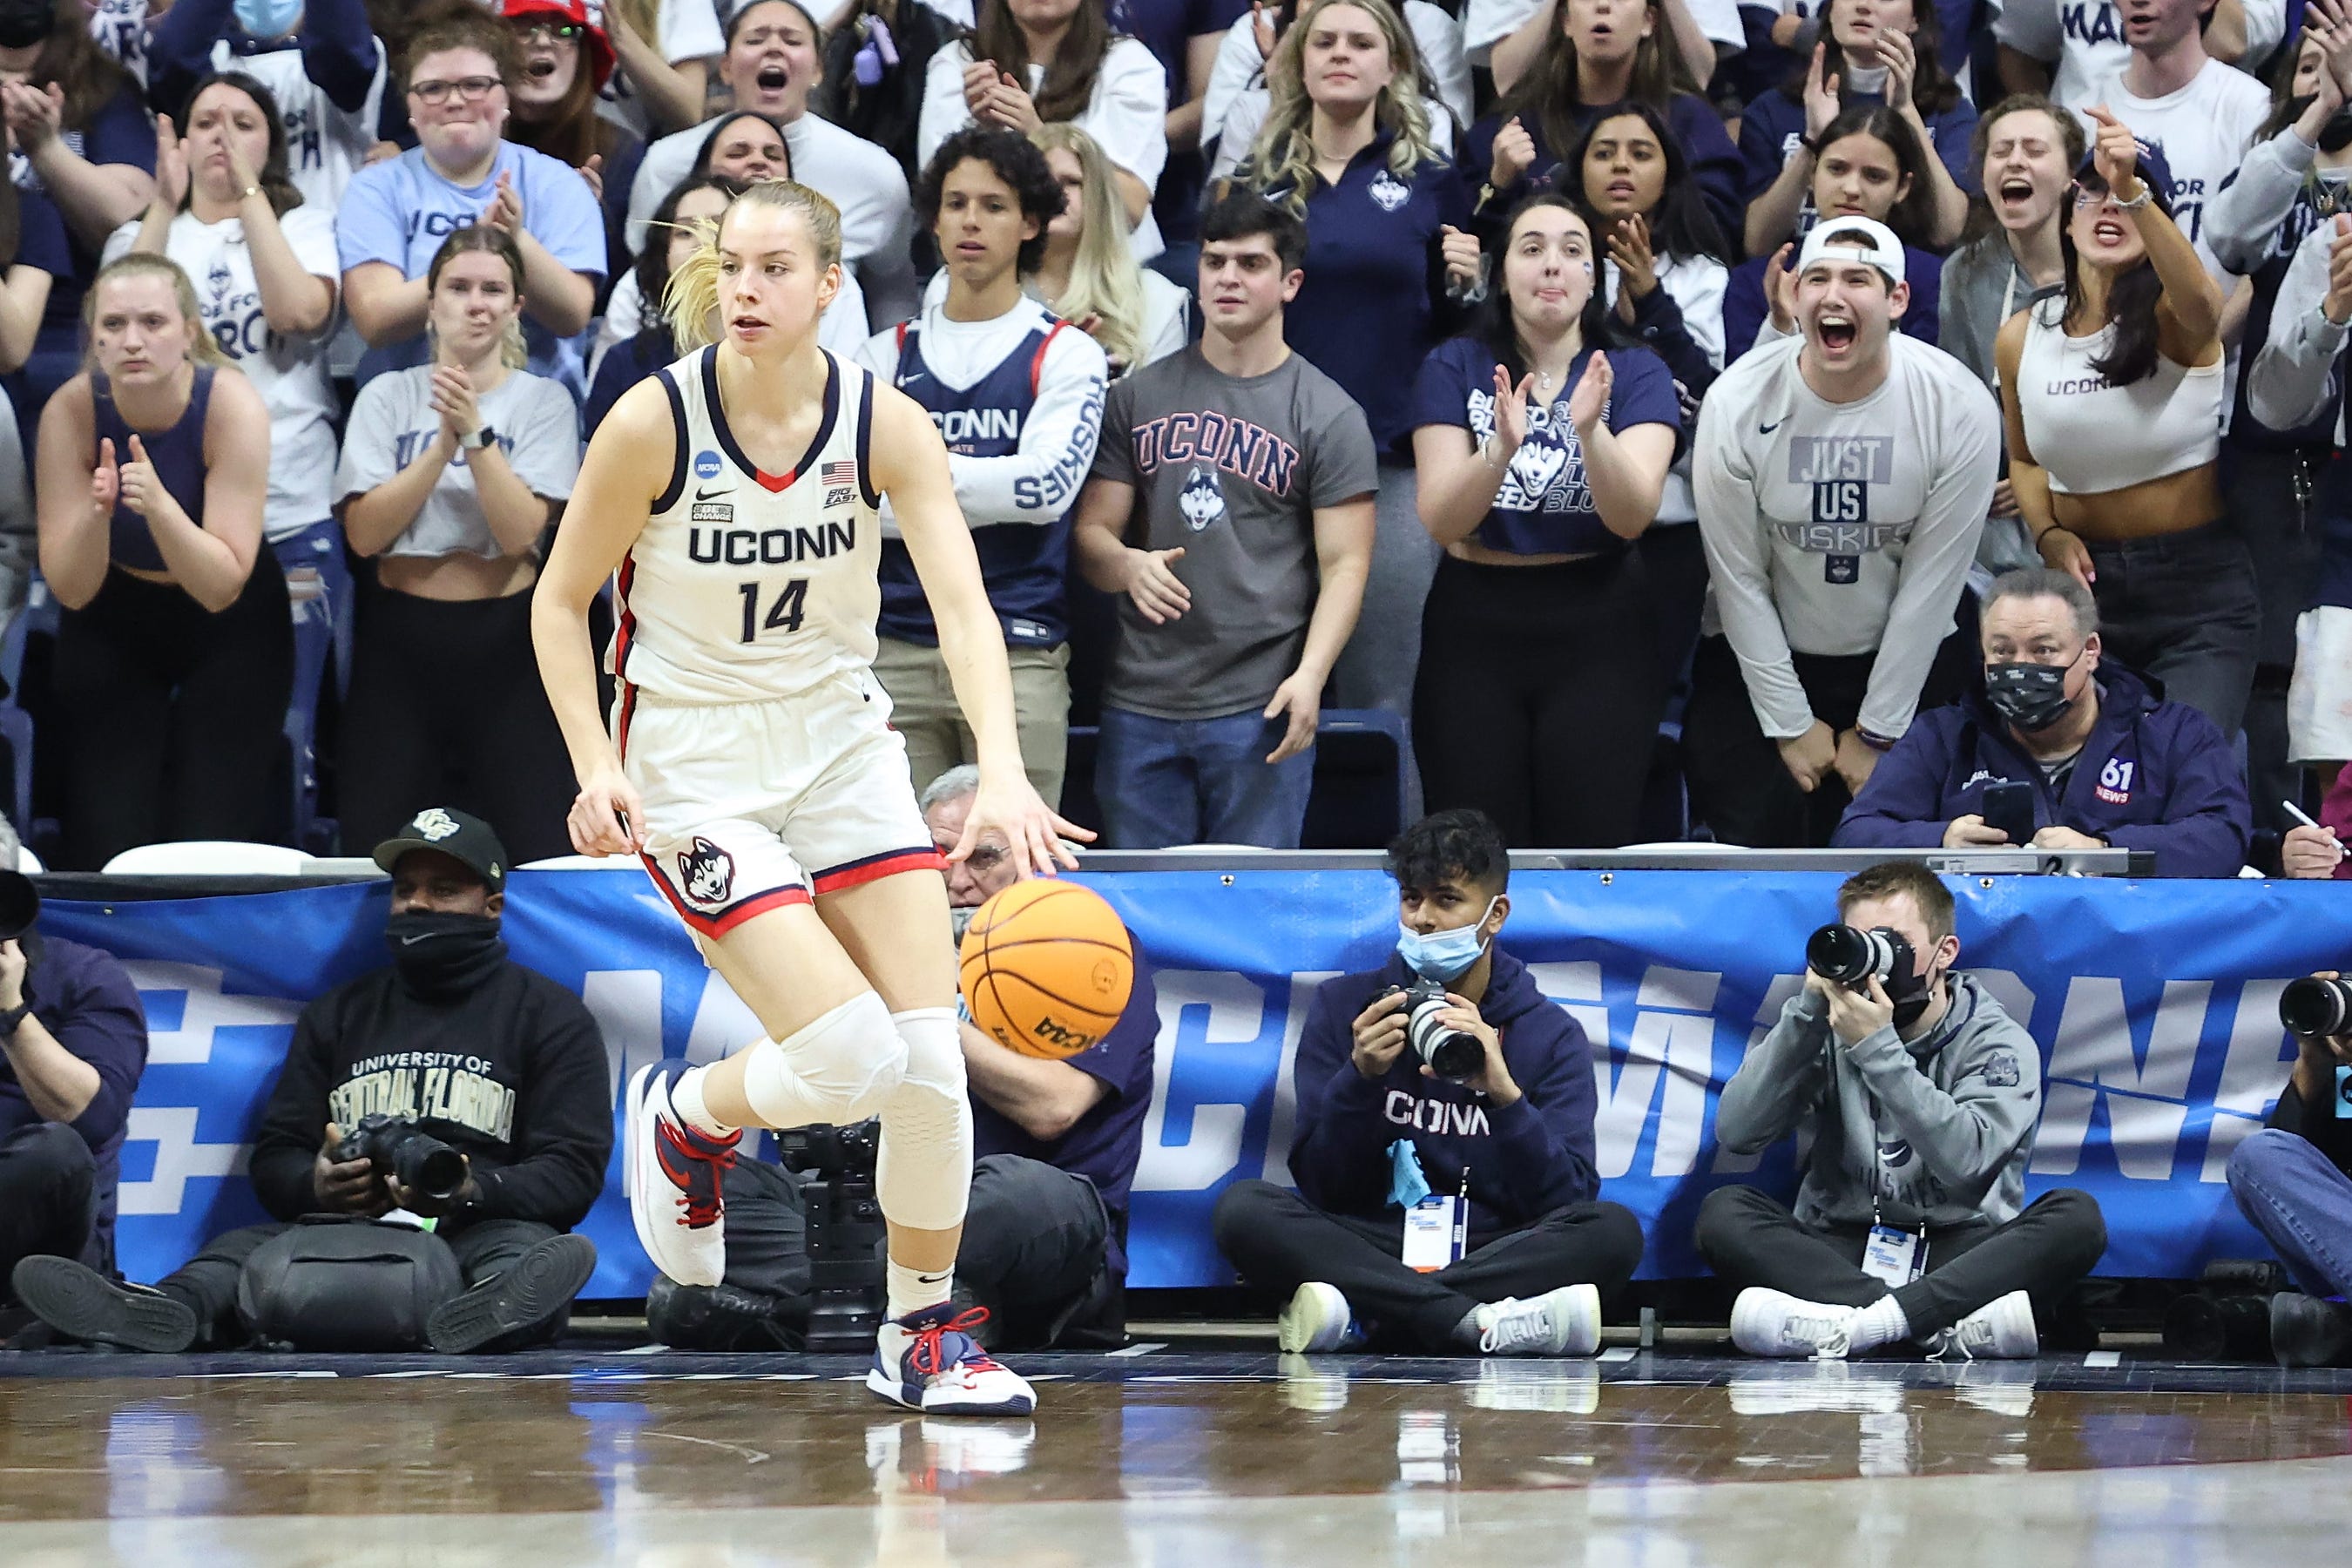 Is UConn vs. South Carolina Even a Rivalry? - The UConn Blog